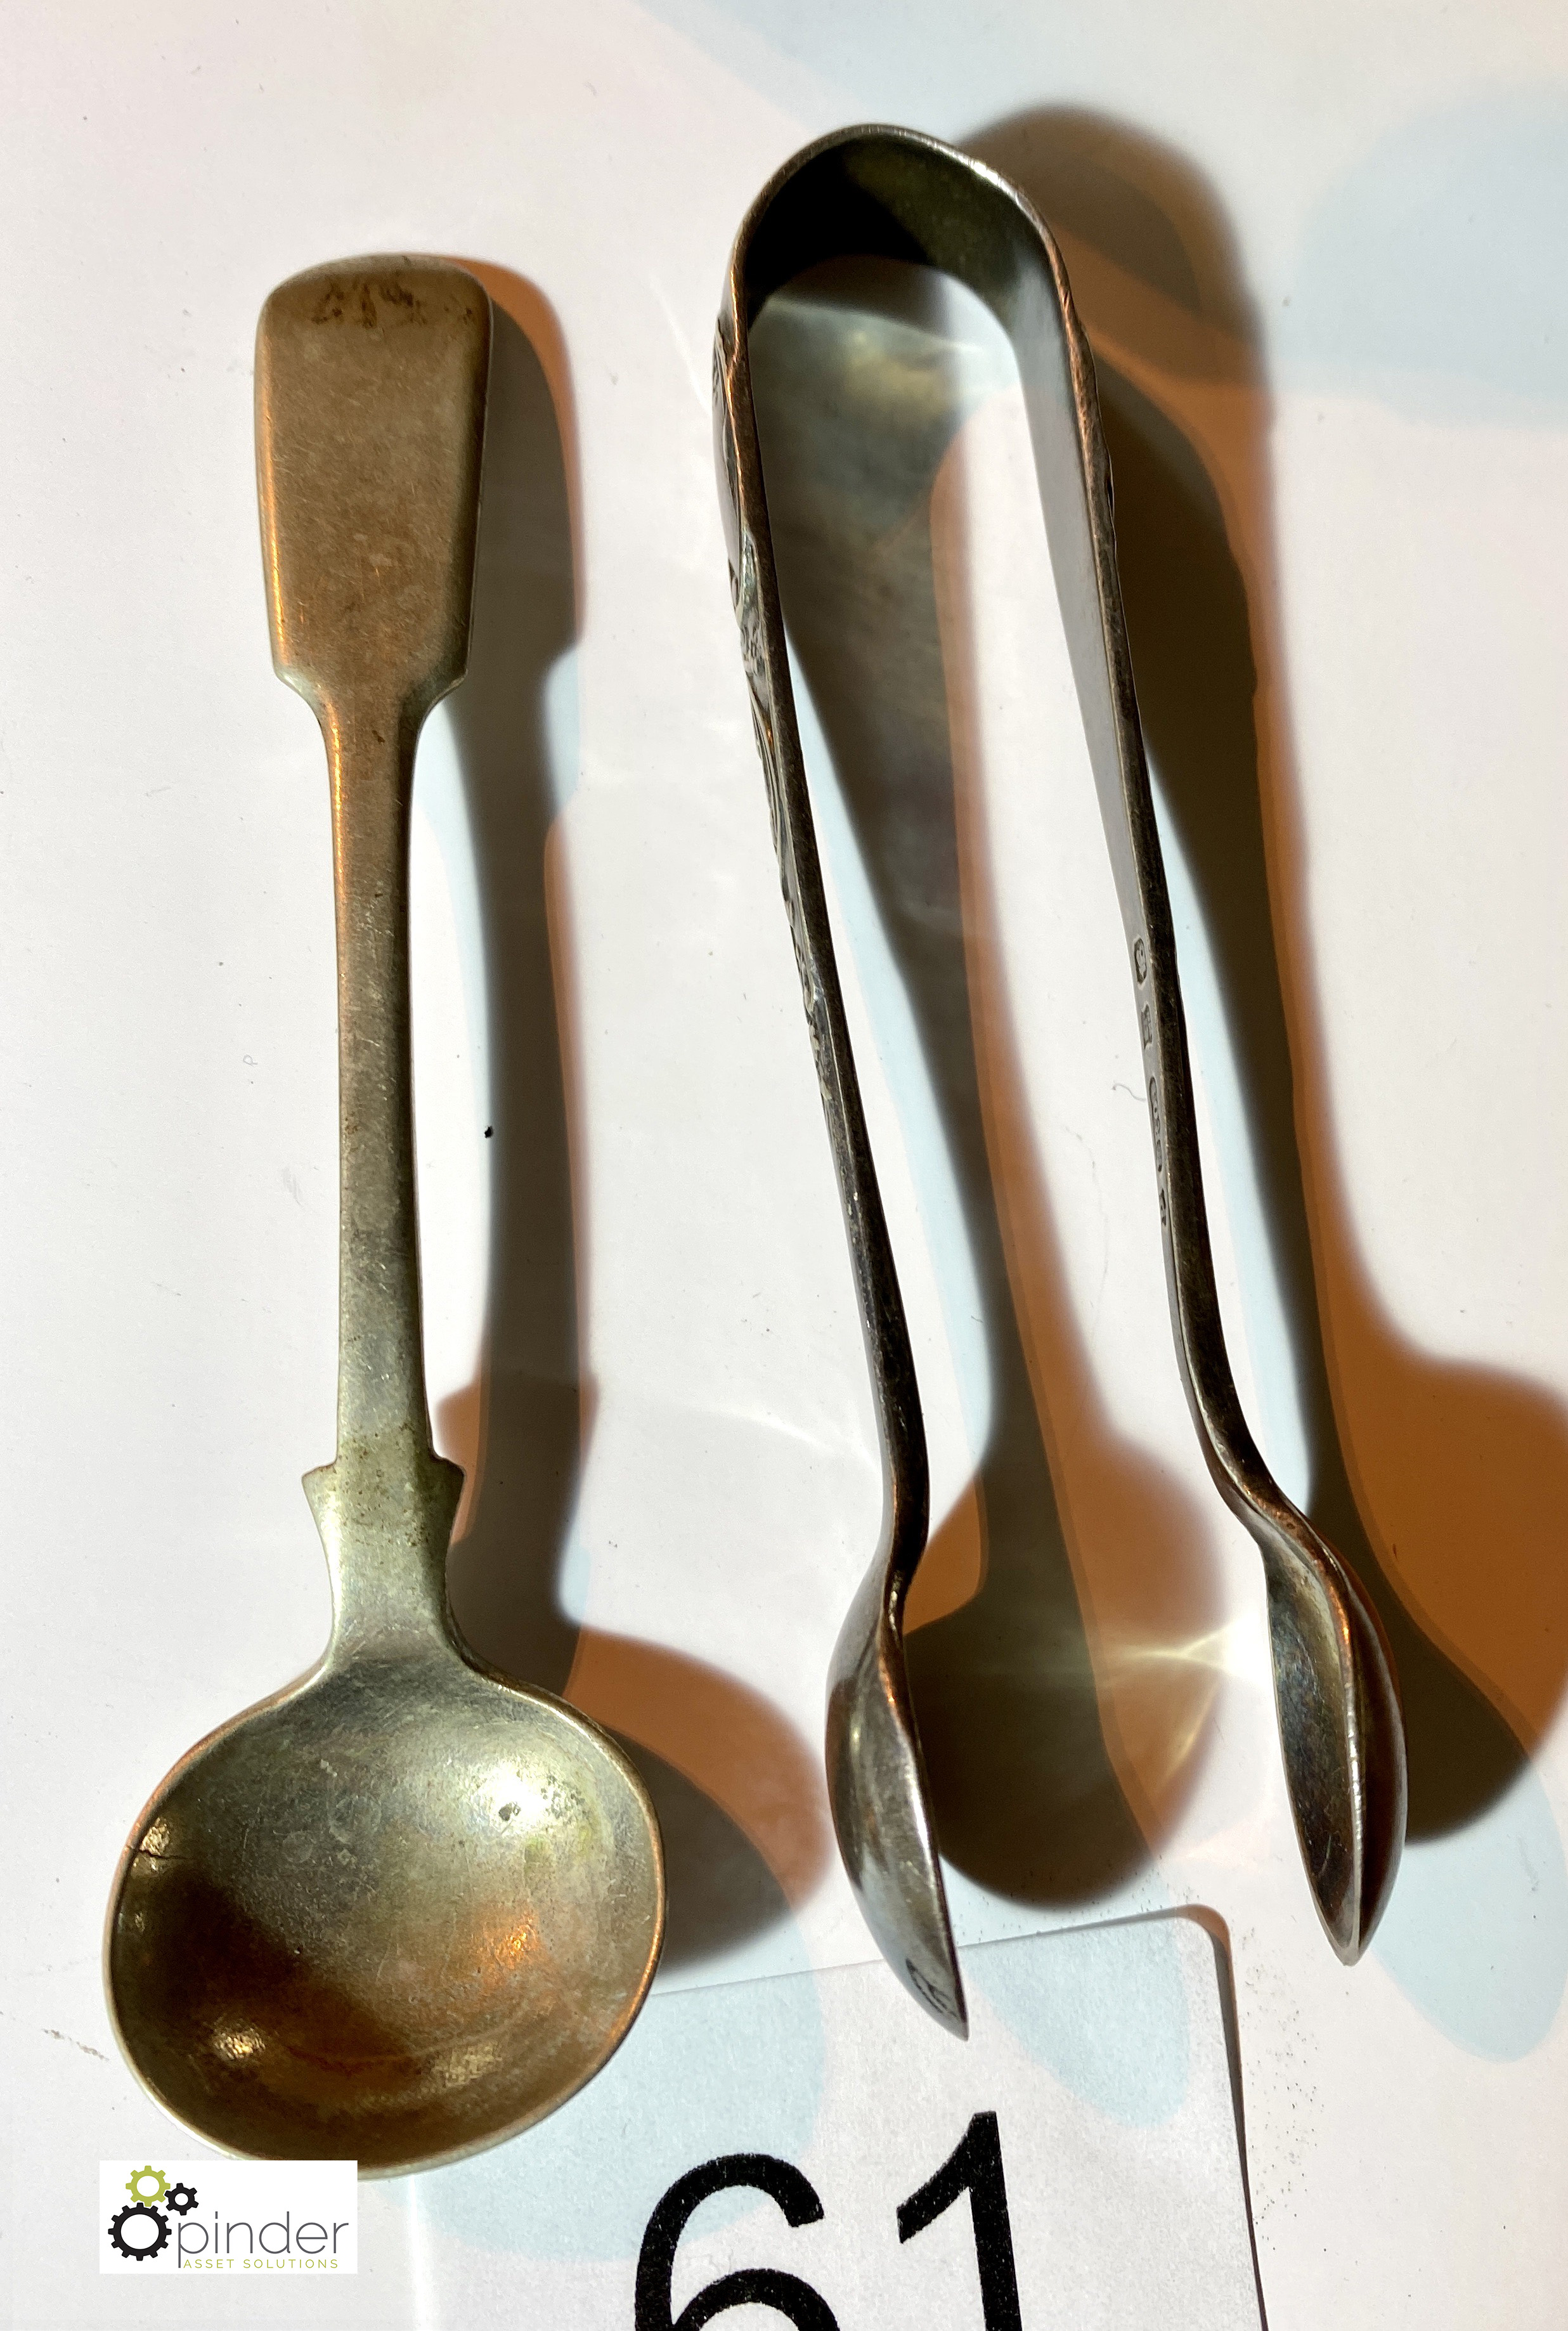 Sugar Spoon and Tongs (location: Wakefield / collection: Monday 7 March)